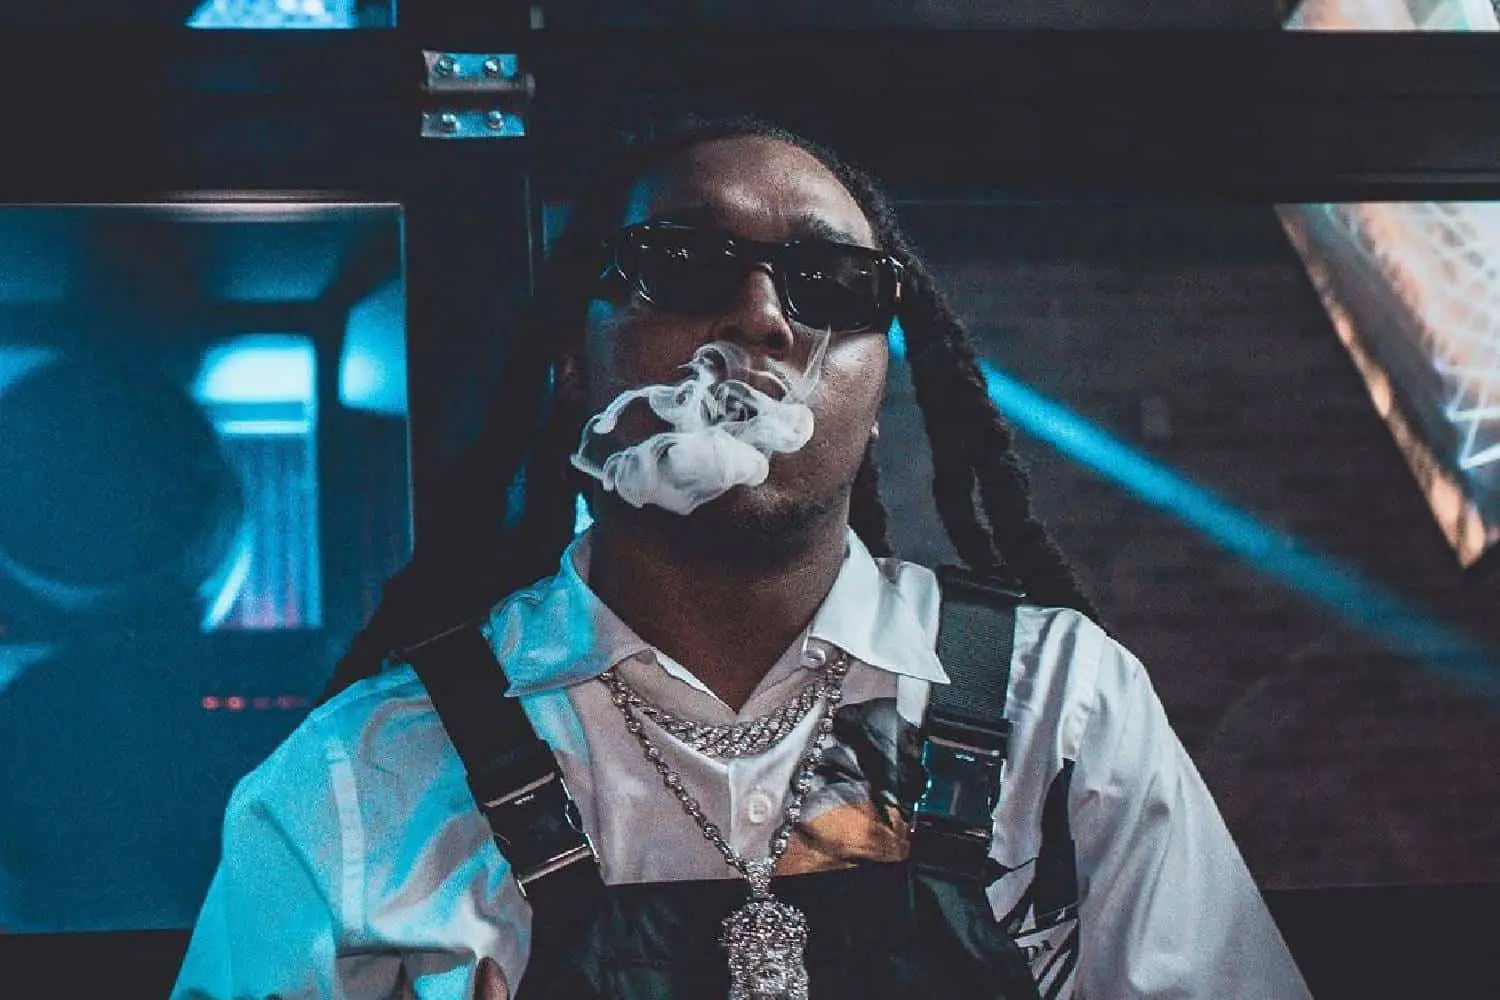 Migos Takeoff biography, Takeoff cause of death, age, net worth, girlfriend, real name